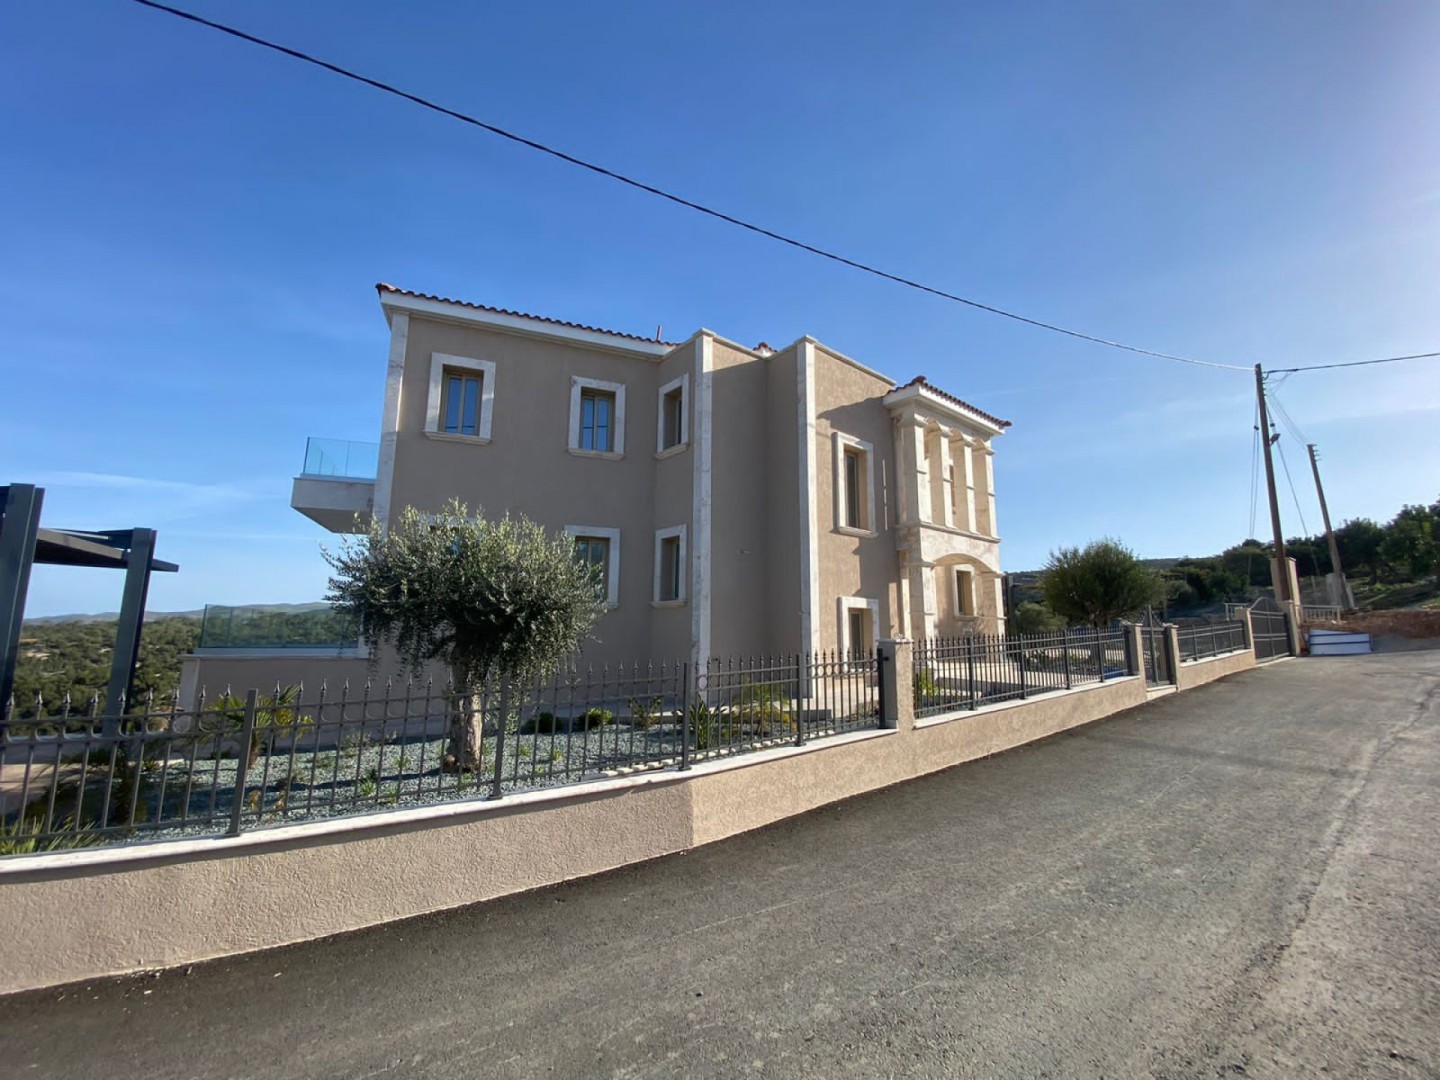 5 Bedroom House for Sale in Peyia, Paphos District